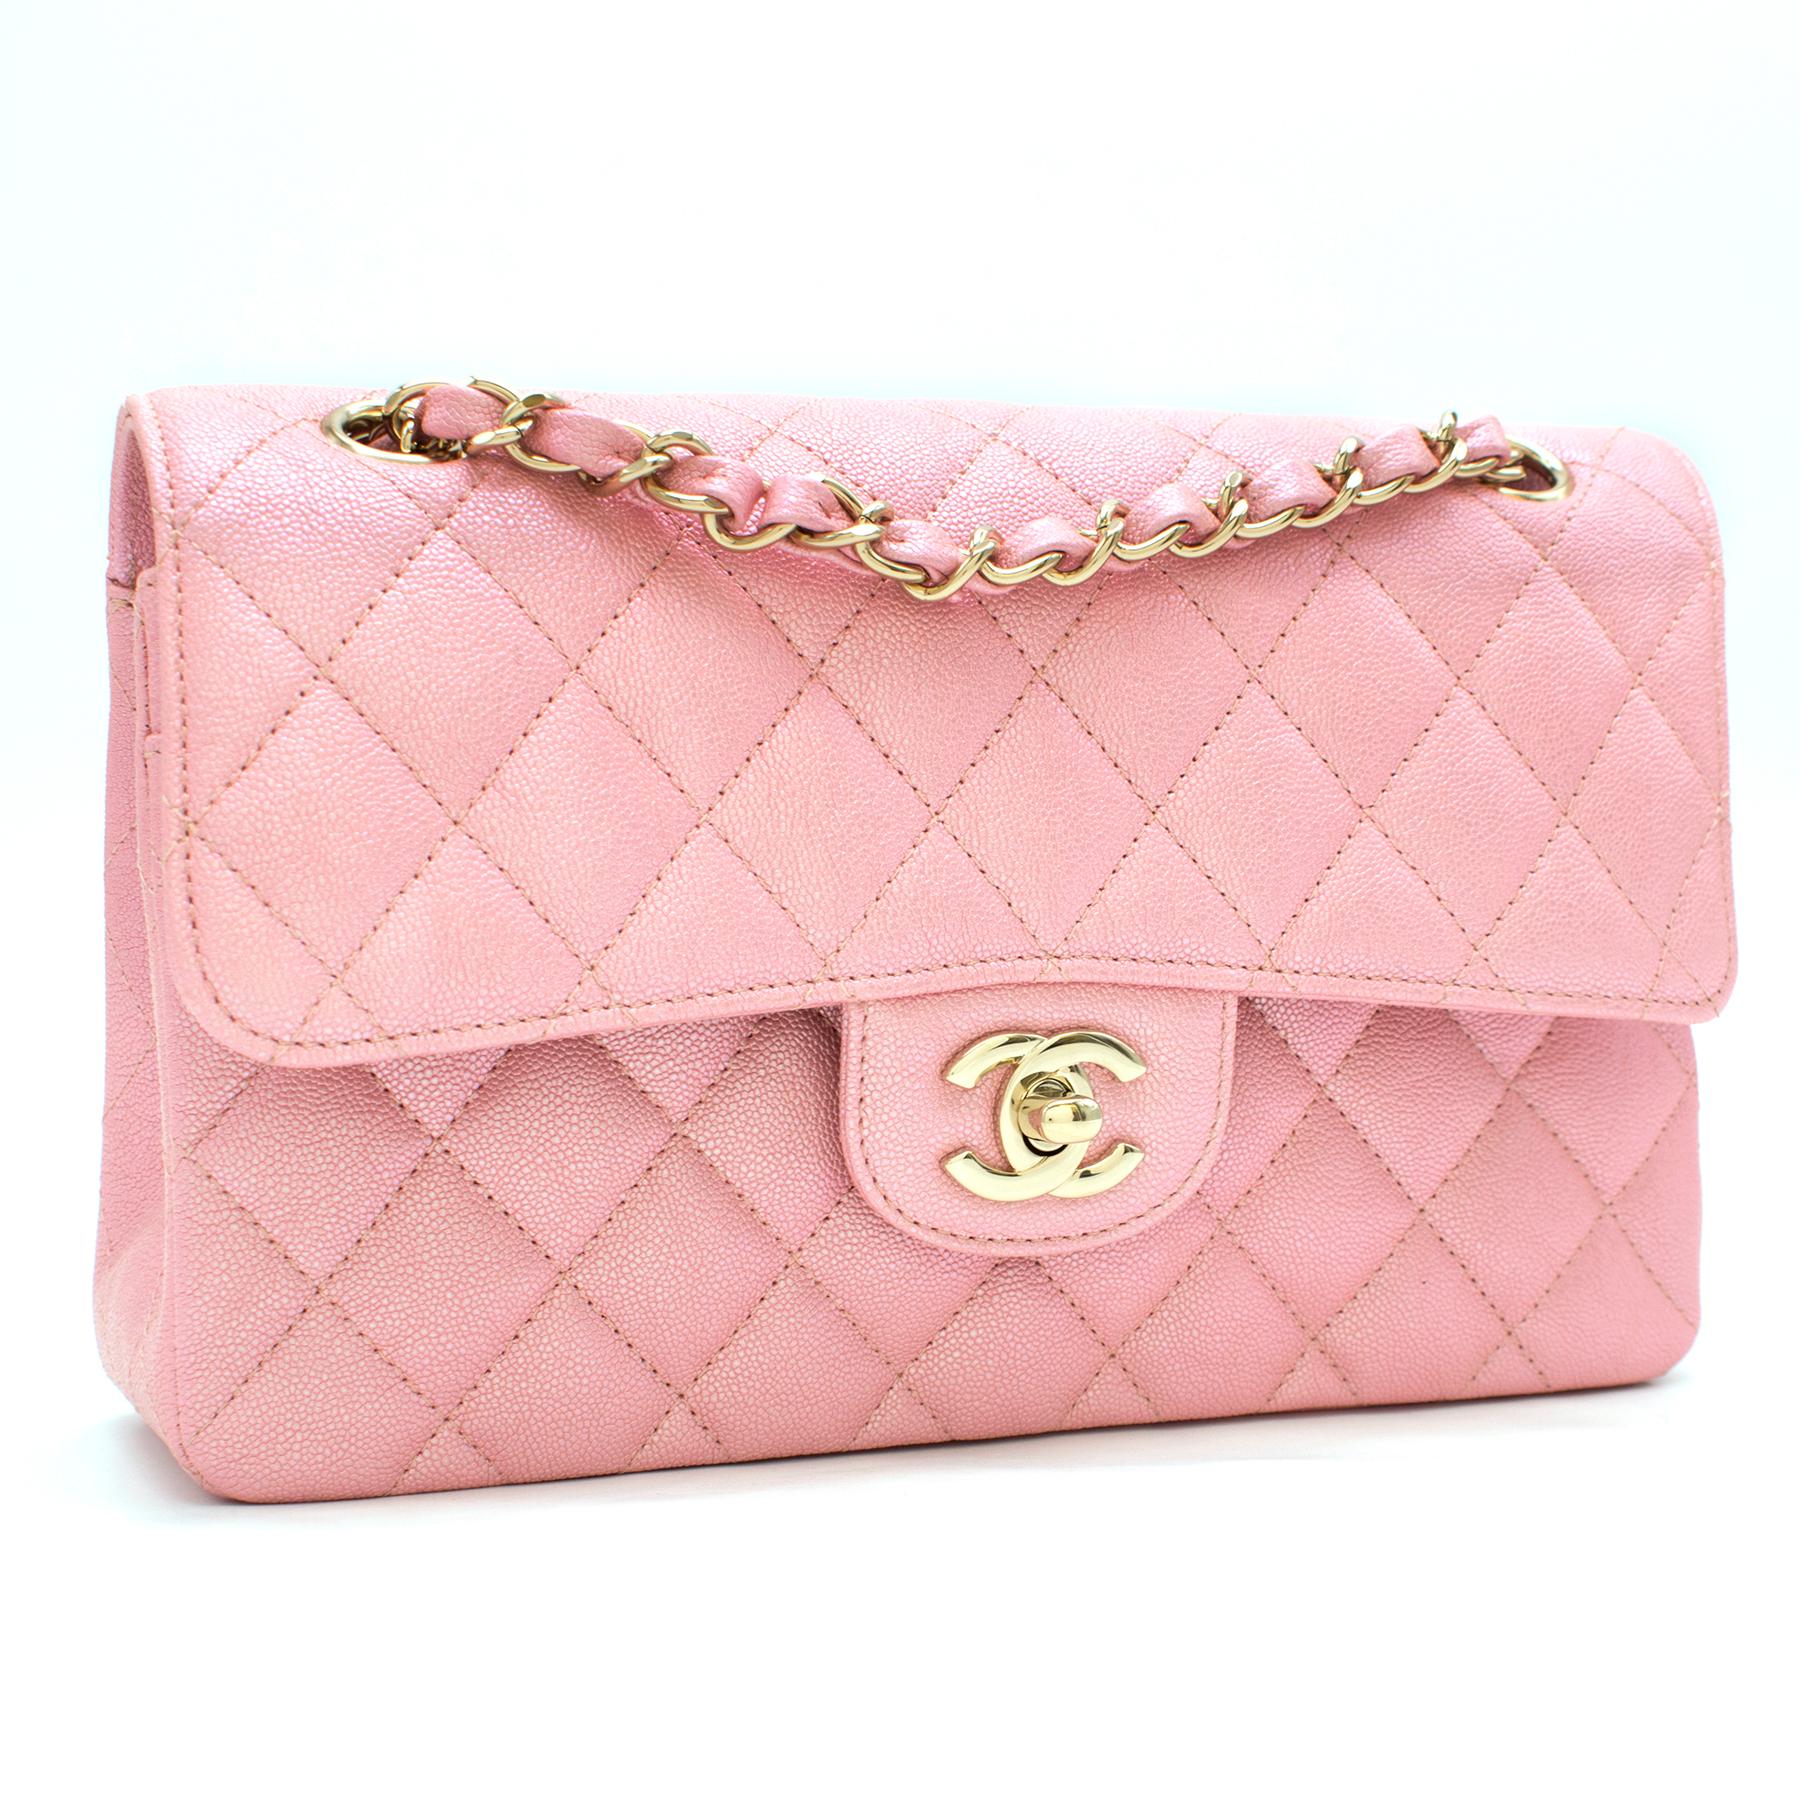 Chanel Pink Iridescent Caviar Classic Flap Bag

-Iridescent pink, 100% caviar leather 
-Gold-toned hardware
-Twist-lock closure and push button closure with classic Chanel logo 
-Cross-stitching design
-Double chain straps
-Two interior pockets
-Two